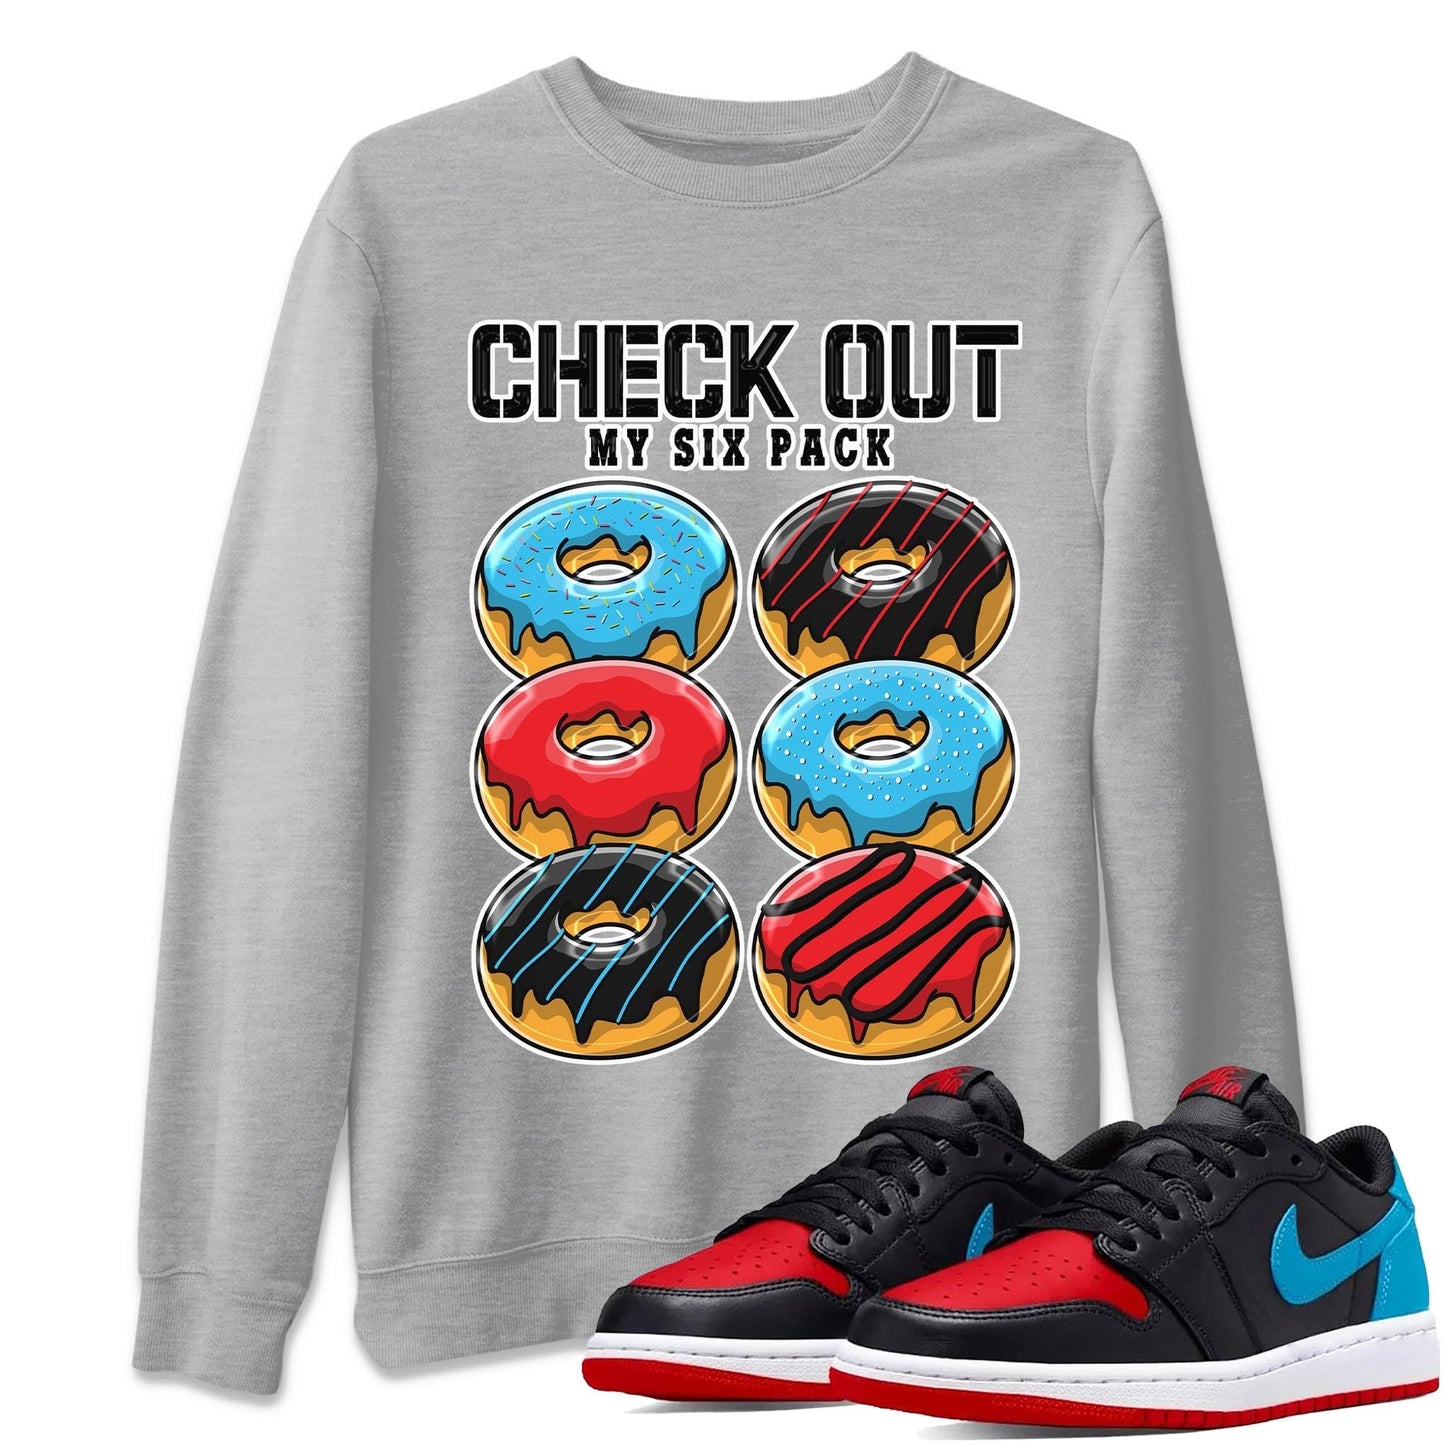 Air Jordan 1 Low UNC to Chicago shirt to match jordans Check Out My Six Pack Streetwear Sneaker Shirt Air Jordan 1 UNC to Chicago Drip Gear Zone Sneaker Matching Clothing Unisex Heather Grey 1 T-Shirt